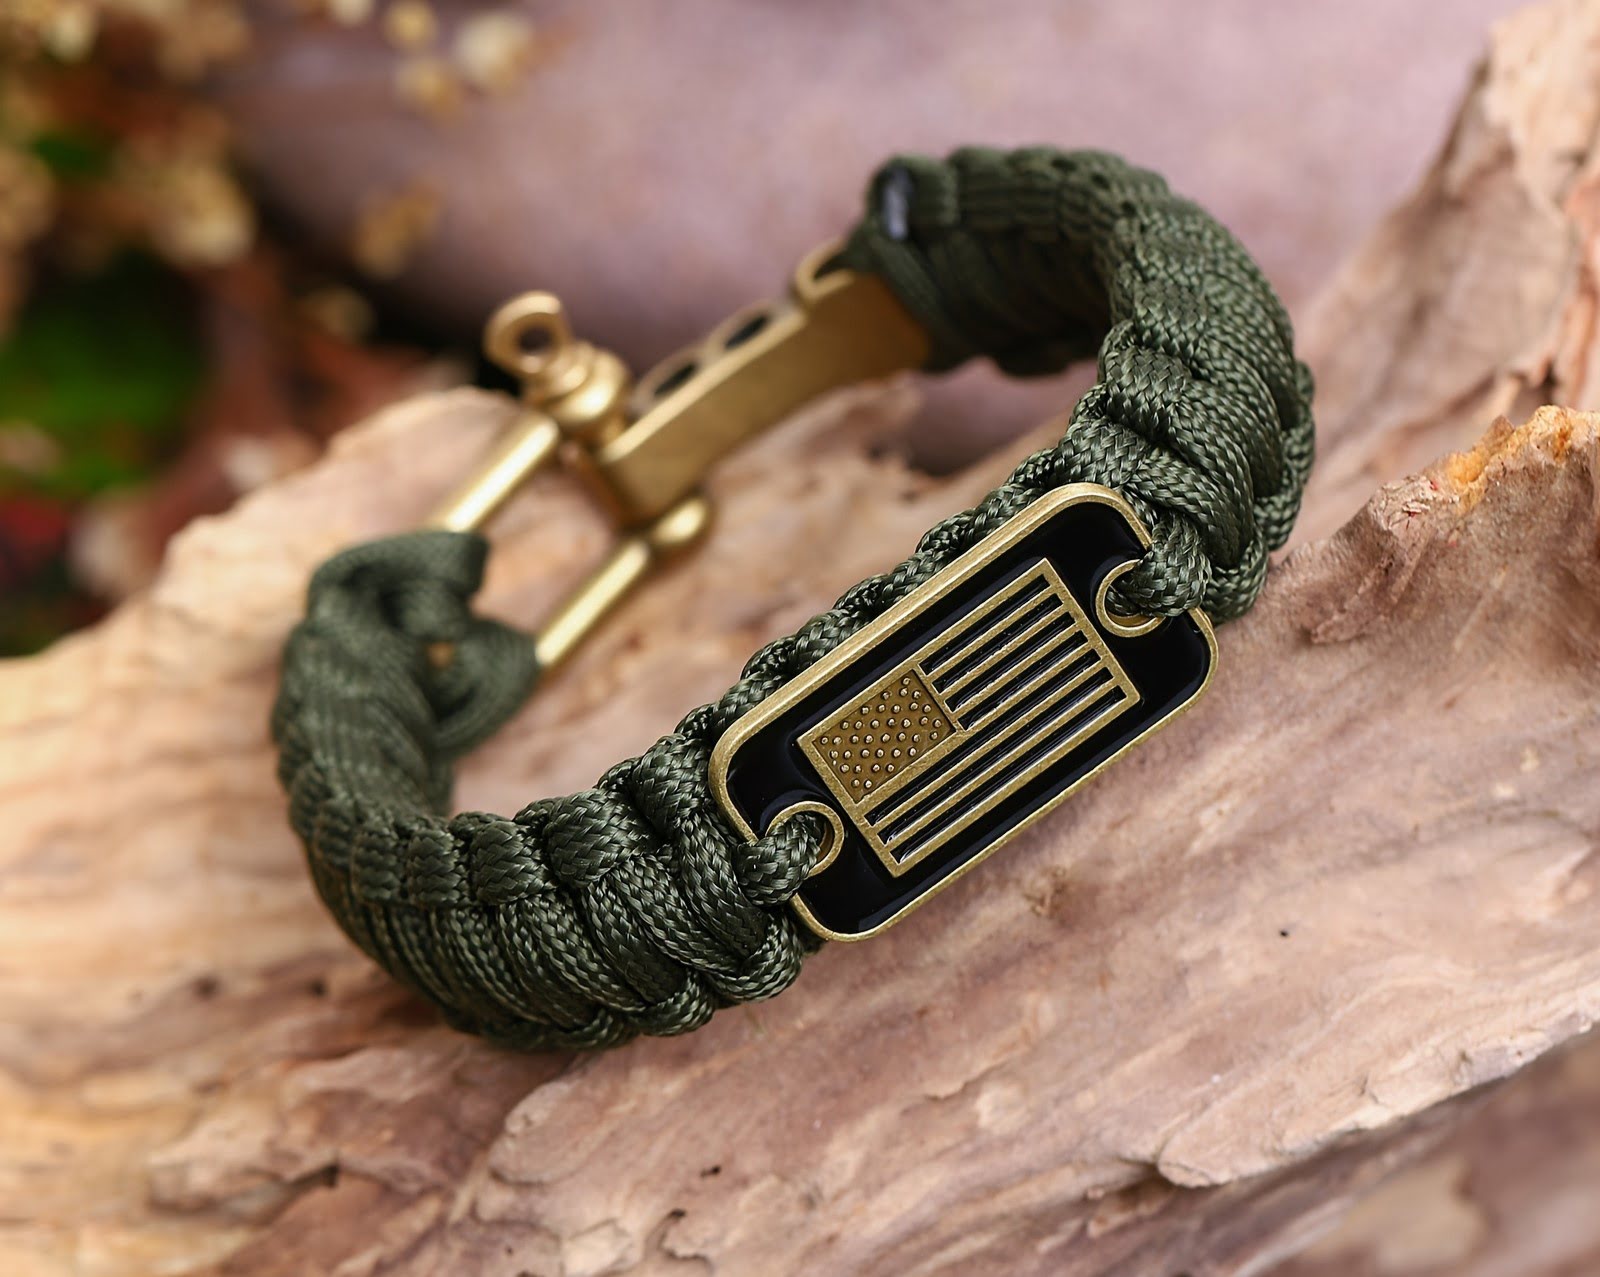 Review: Versatile Paracord Bracelet for All Your Outdoor Needs